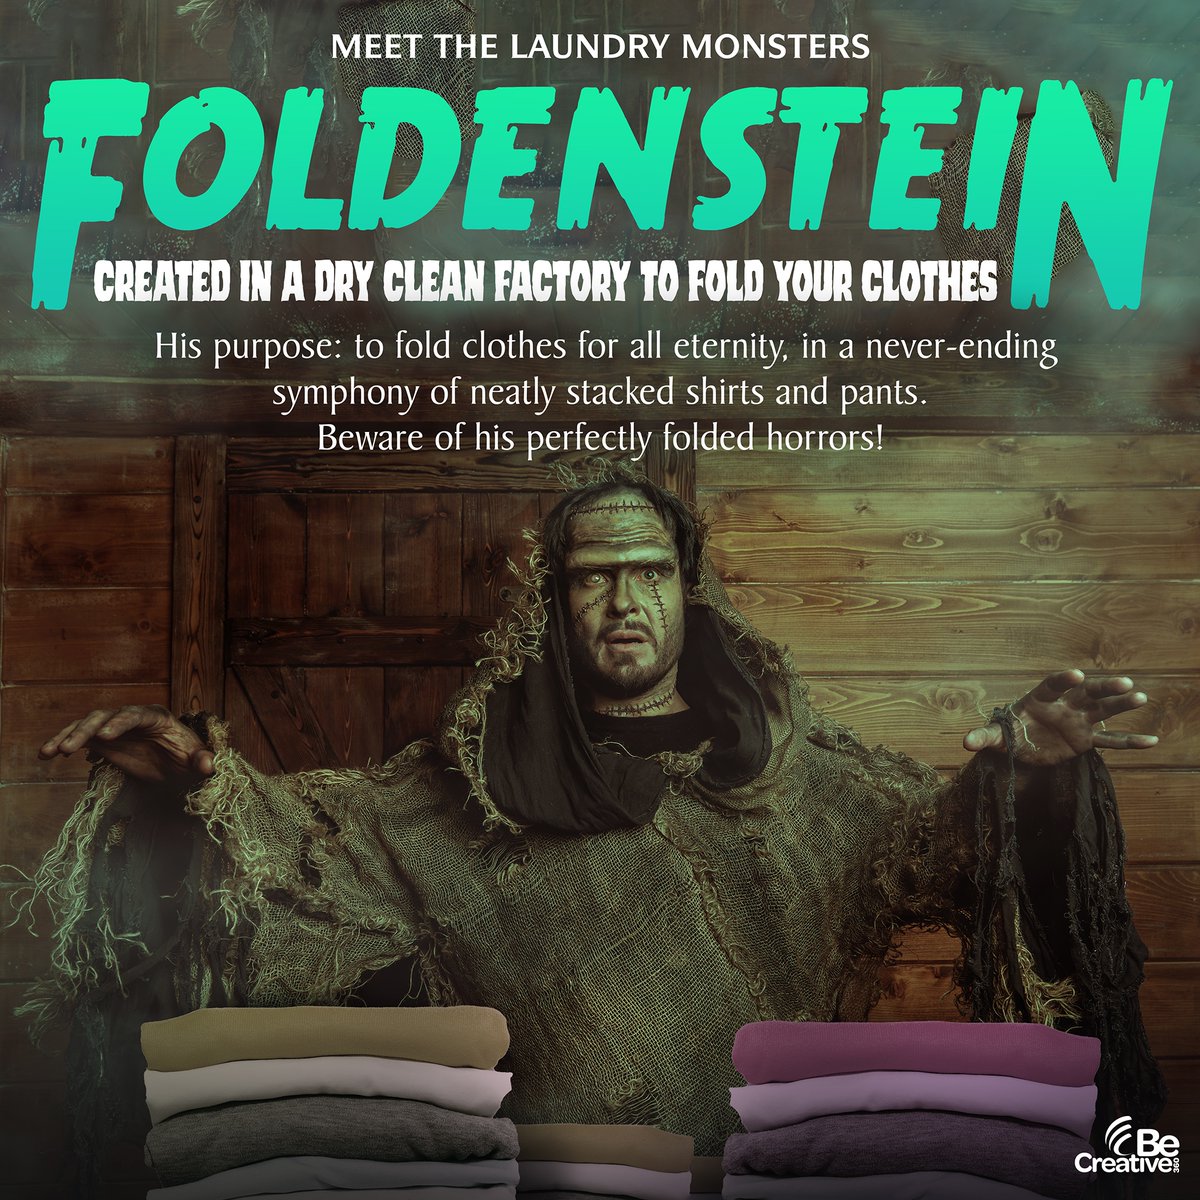 Meet one of our #laundrymonsters - Foldenstein! Created in a dry cleaning factory, this monster has one goal - to provide you with endless perfectly folded clothing. It's almost scary... how spookily perfect Foldenstein can fold!🧟‍♂️ #LaundryMonster #Frankenstein #HorrorComedy